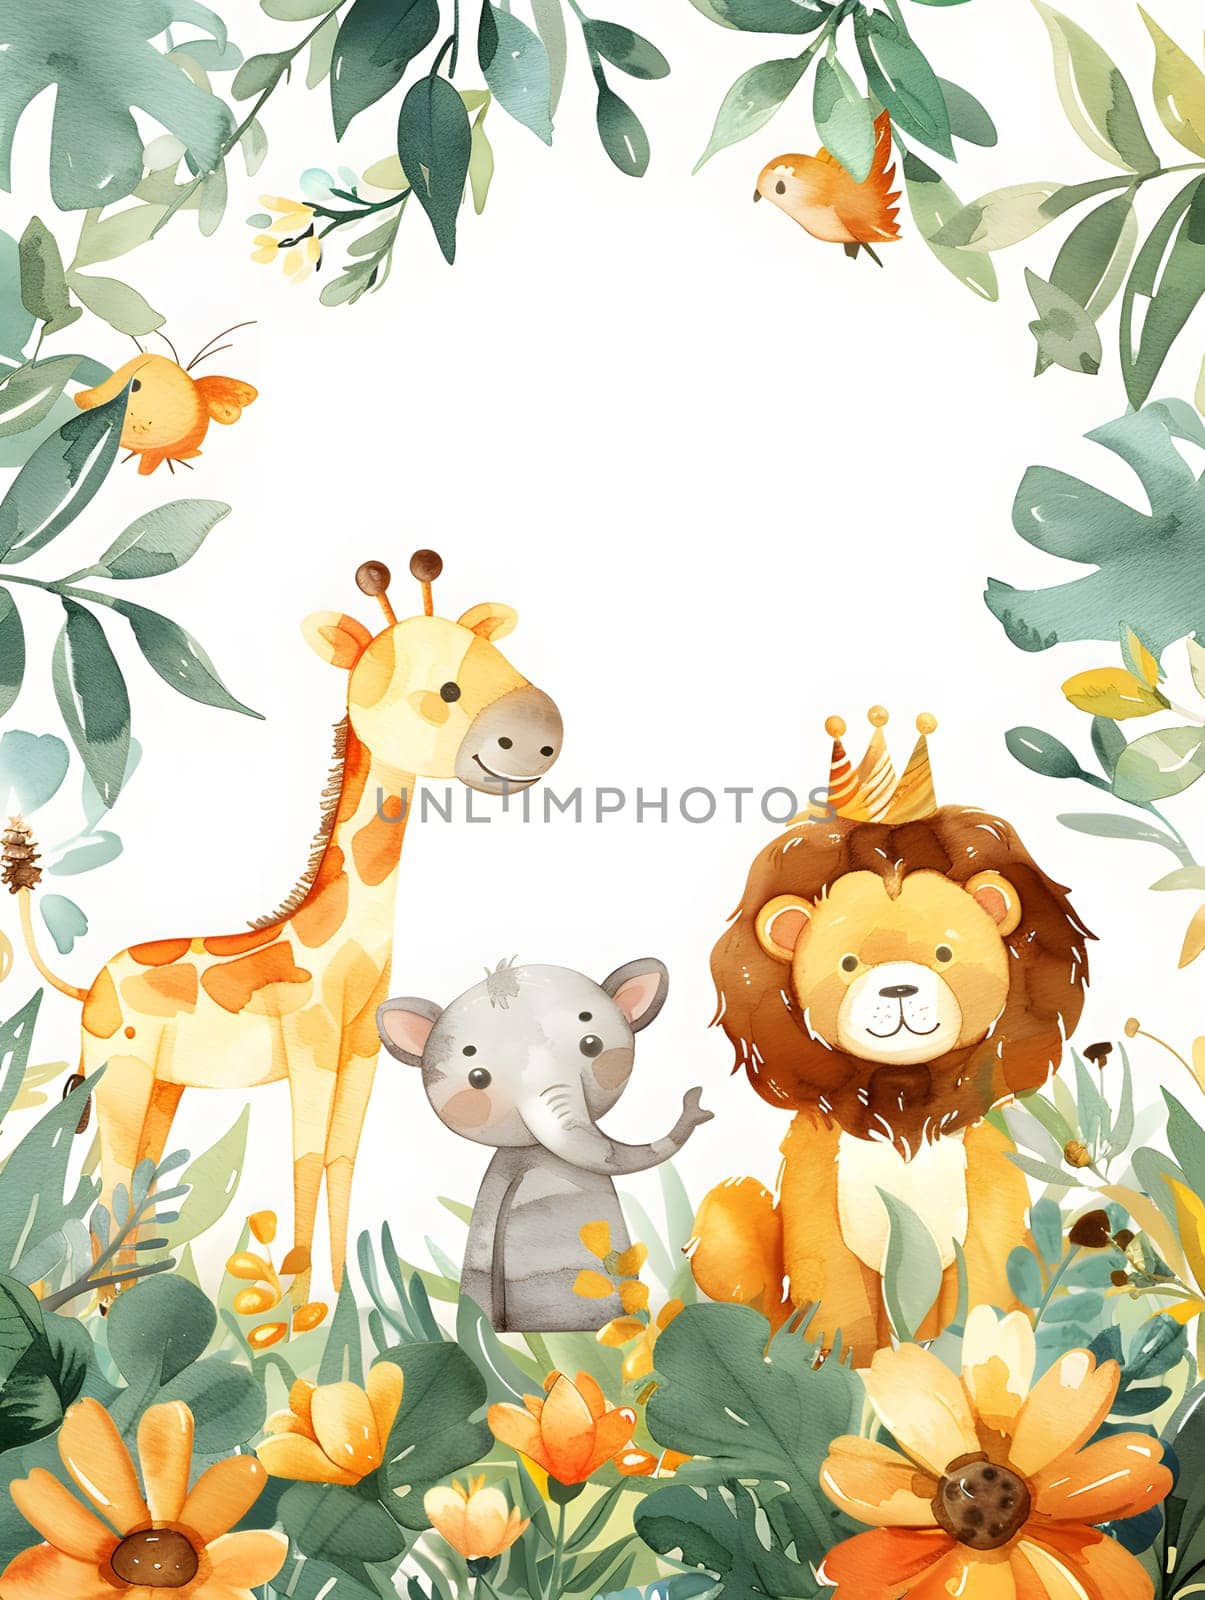 A giraffe, elephant, lion, and bear are happily sitting amidst a vibrant field of flowers, creating a beautiful scene for a botanical illustration